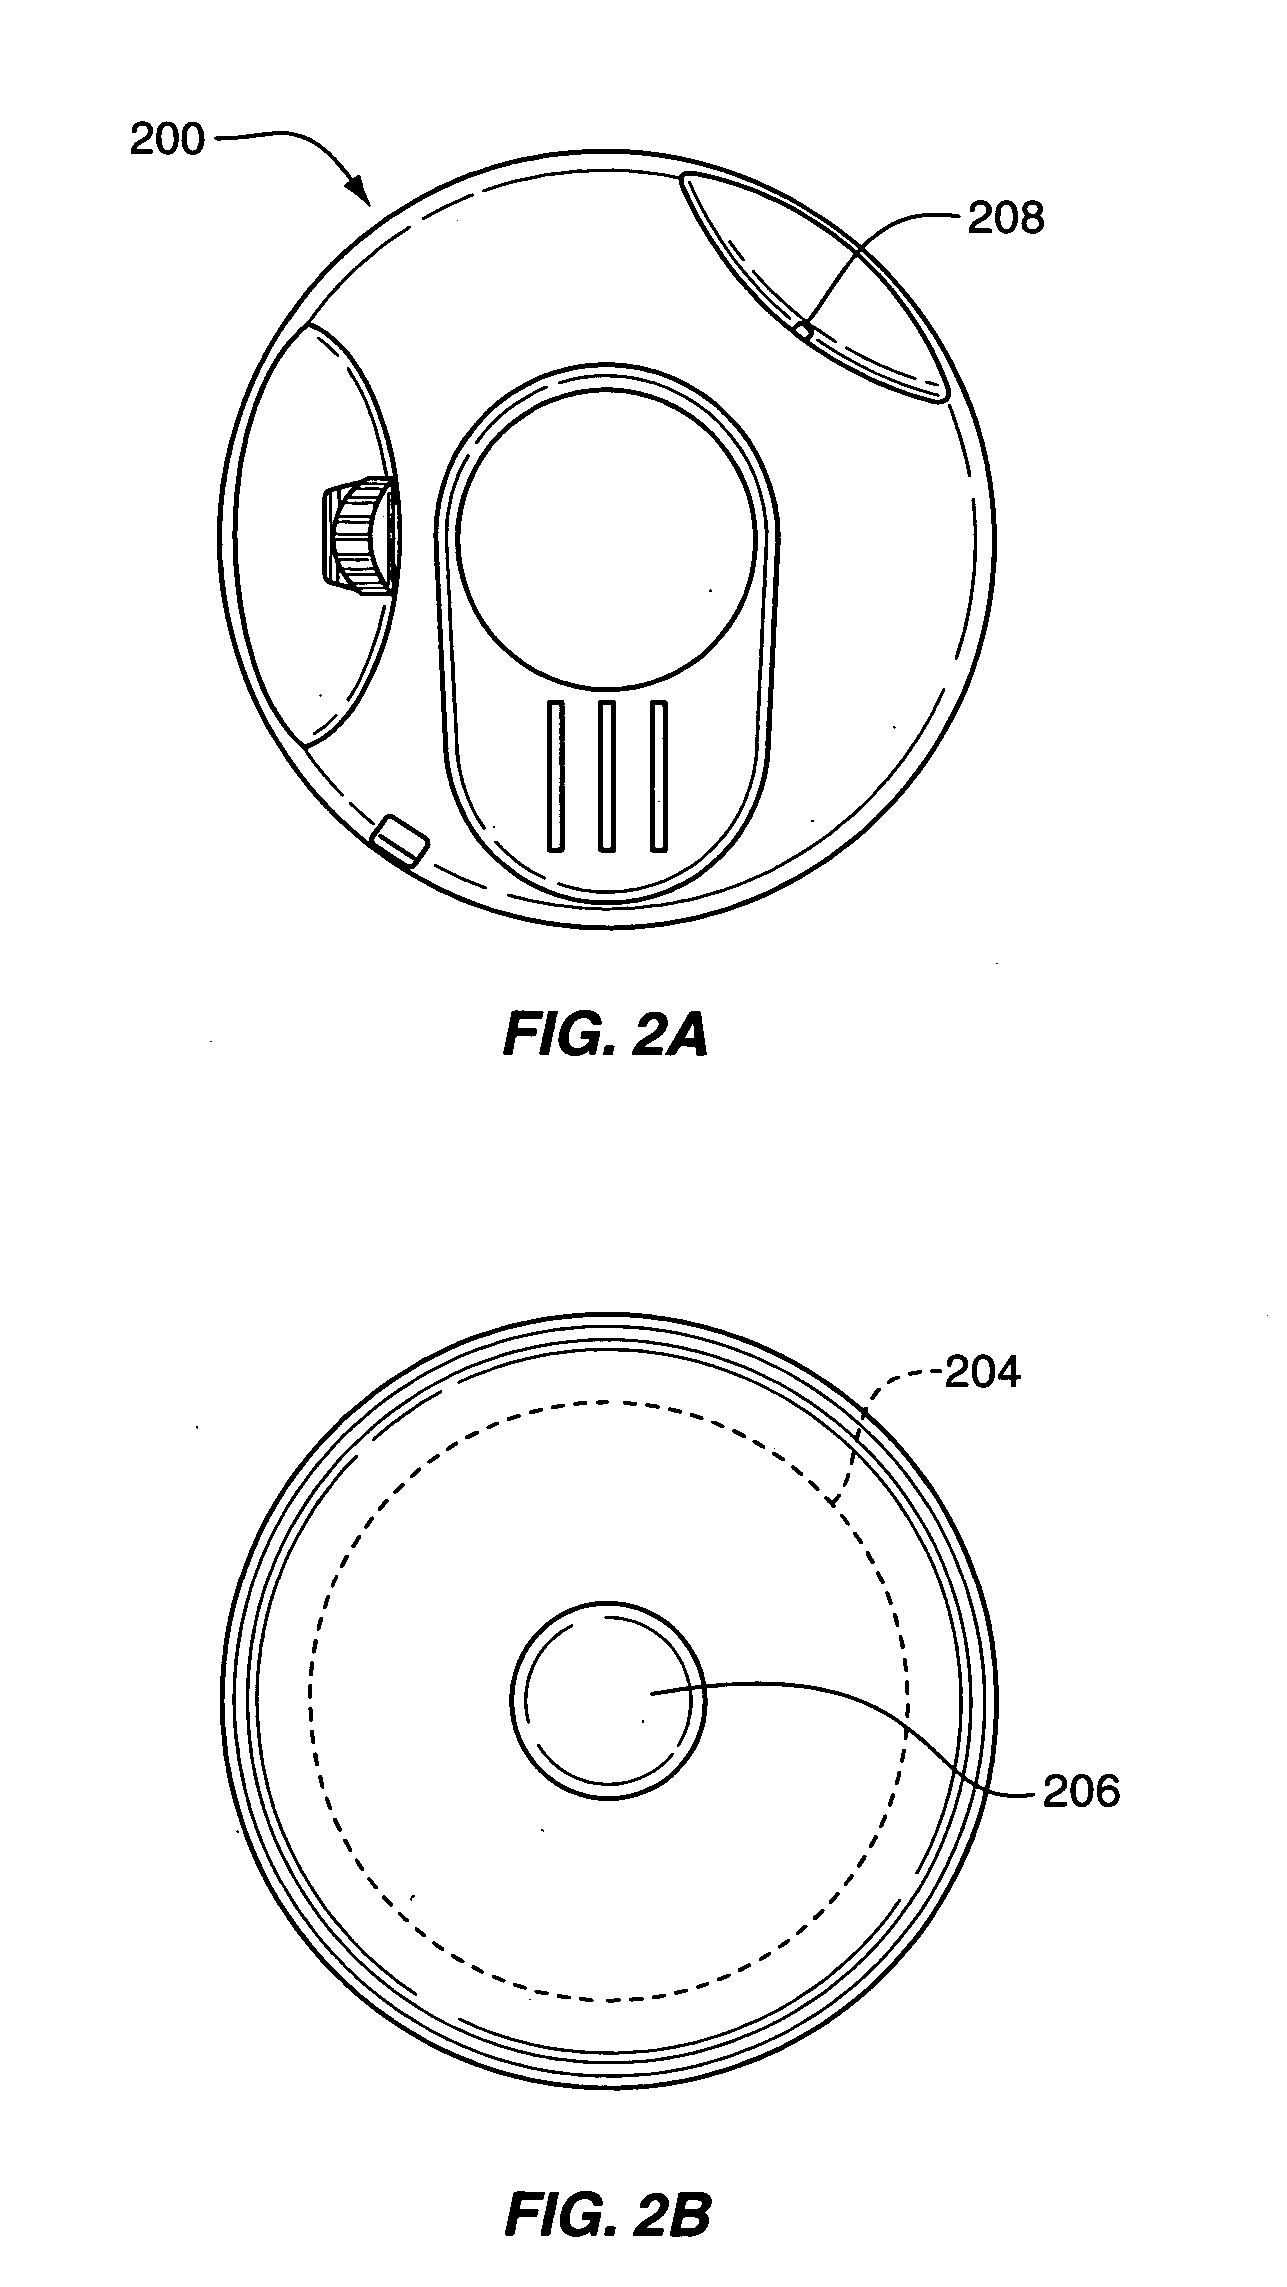 Implantable hearing aid transducer system